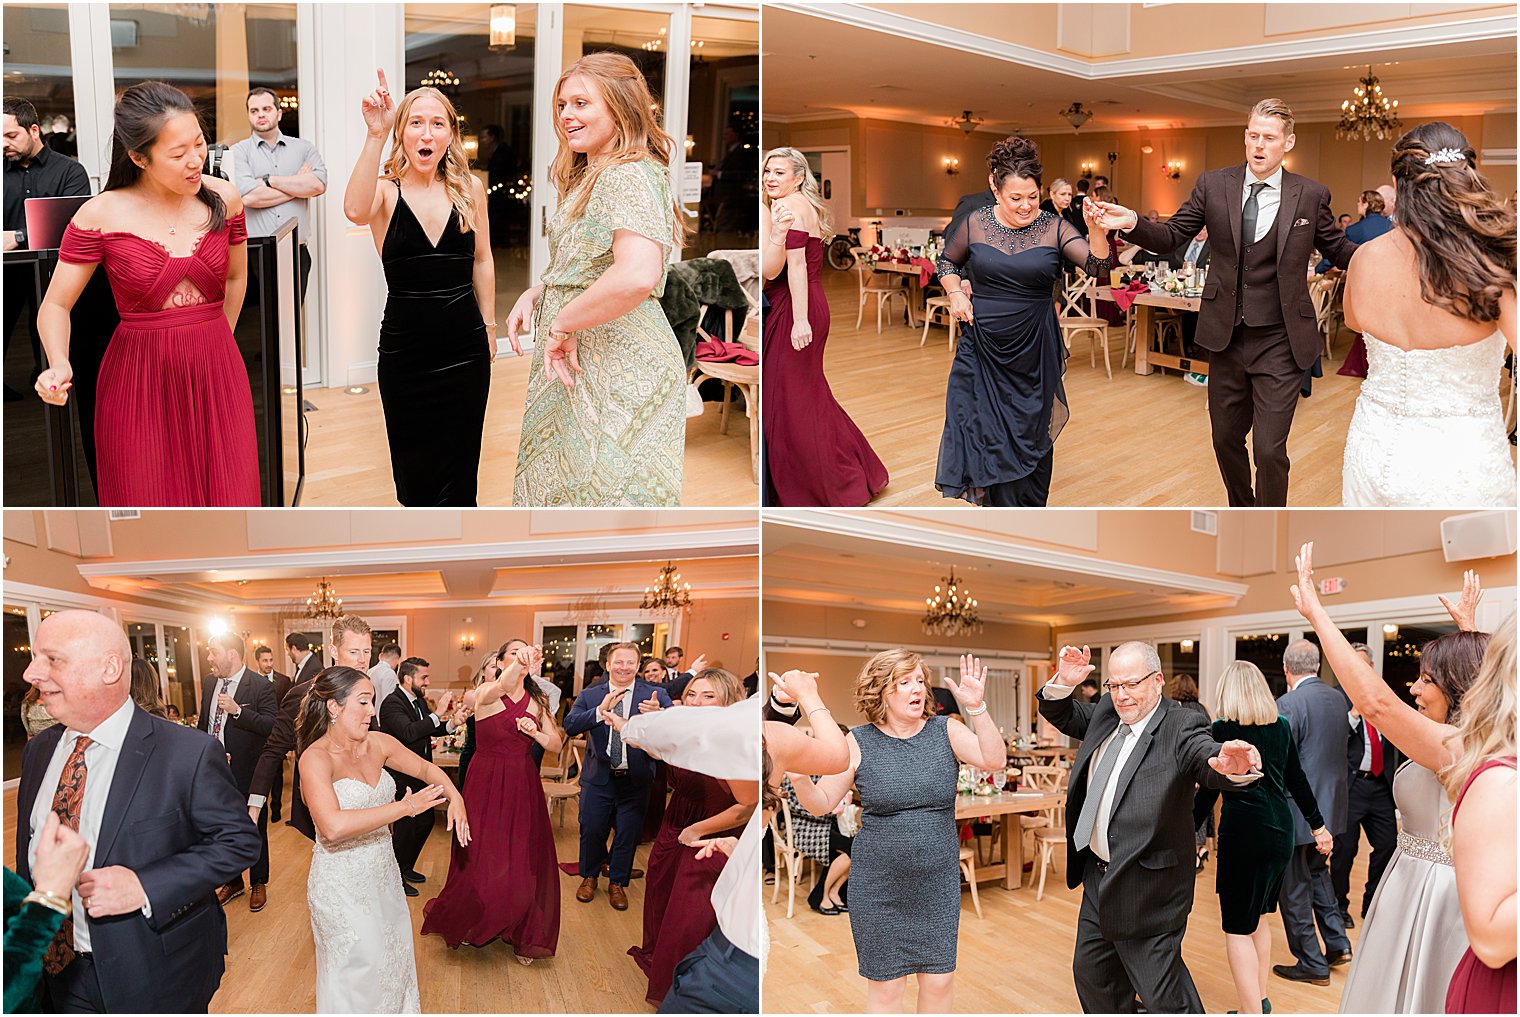 guests dance with newlyweds at NJ wedding reception